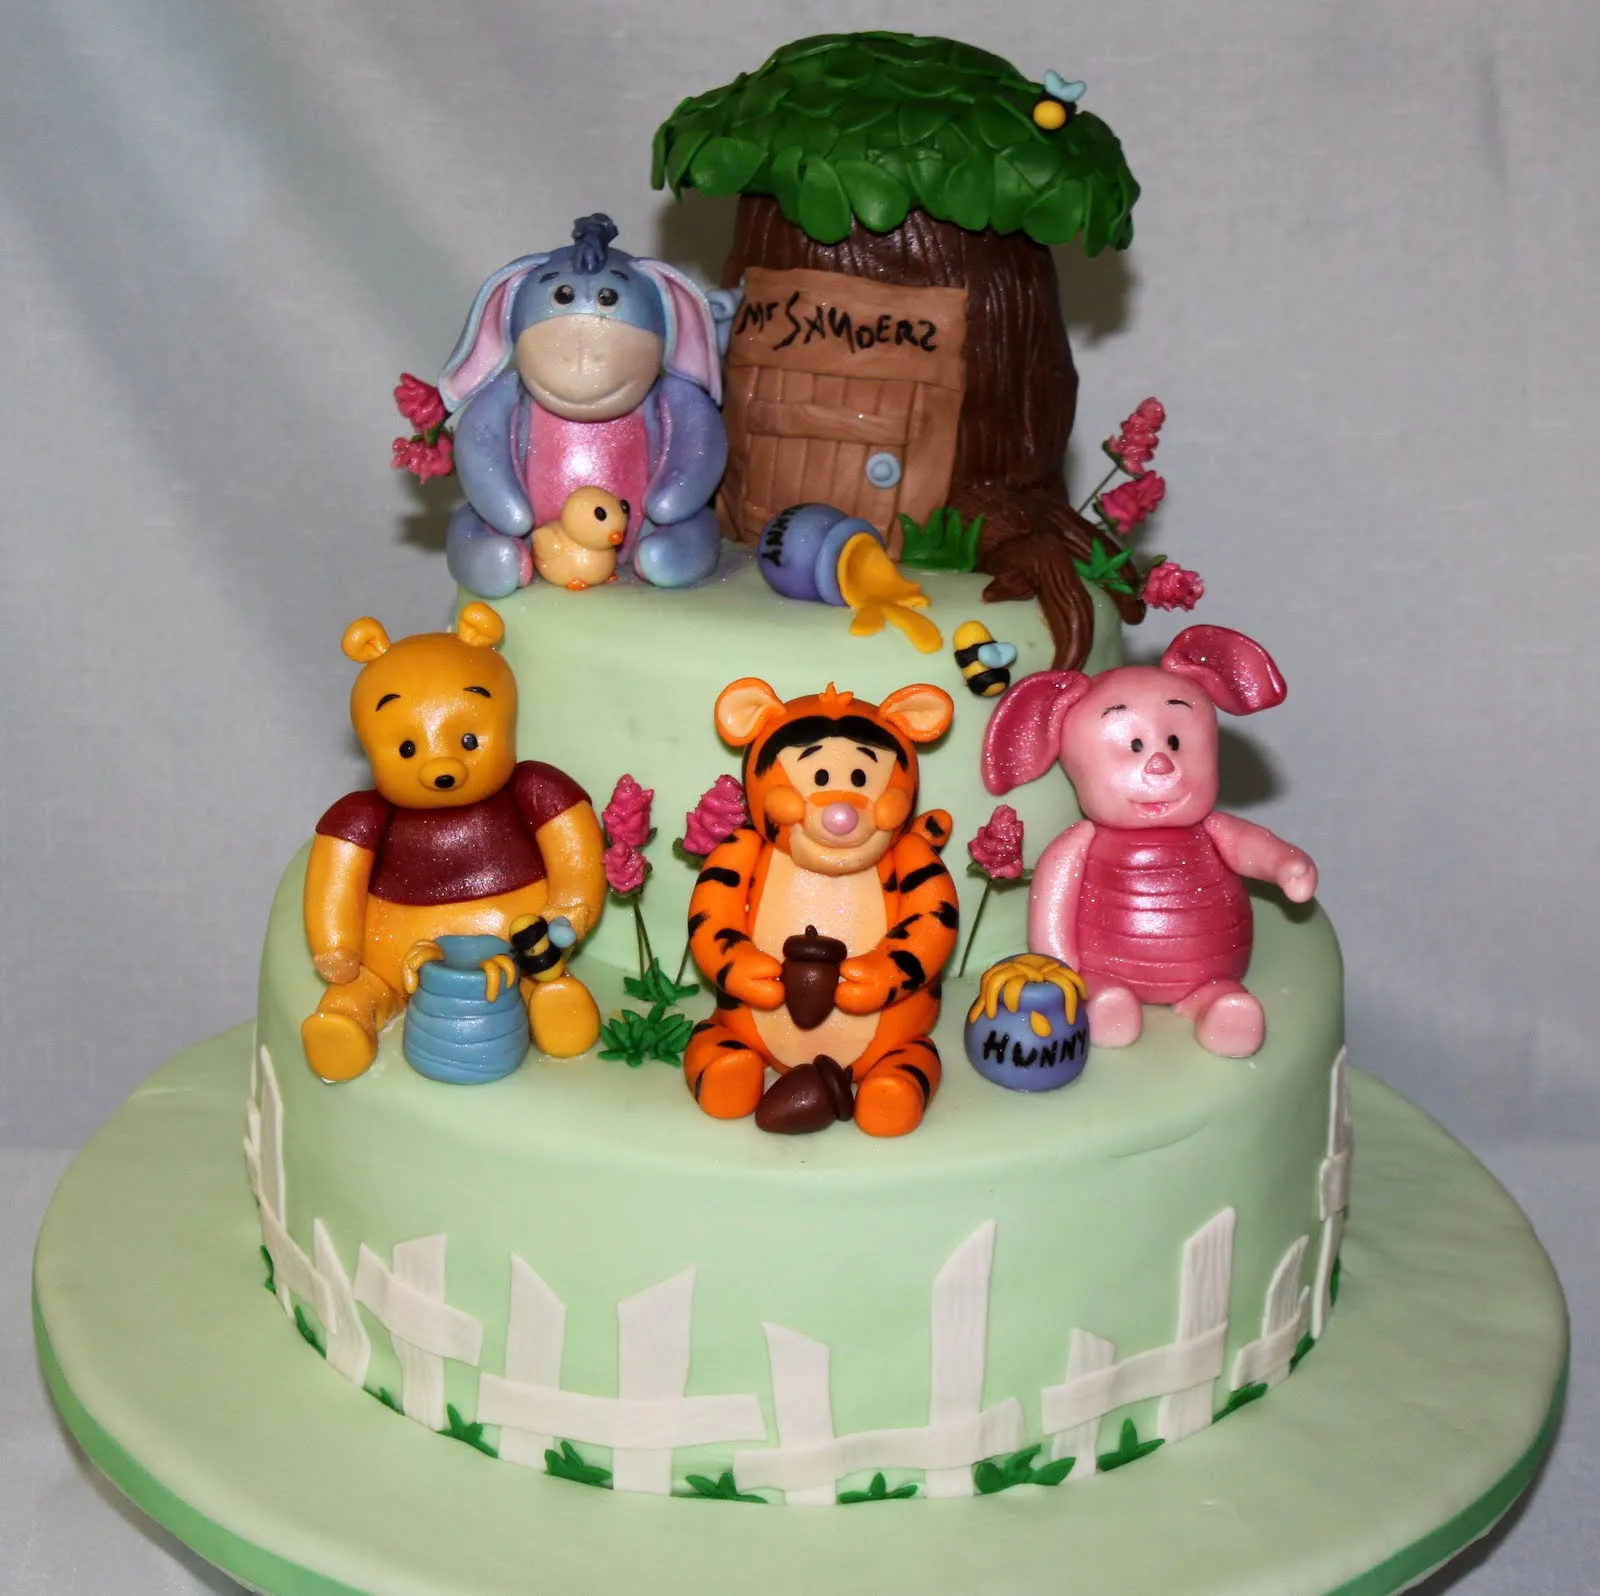 Amazing Grace Cakes: Winnie the Pooh Baby Shower